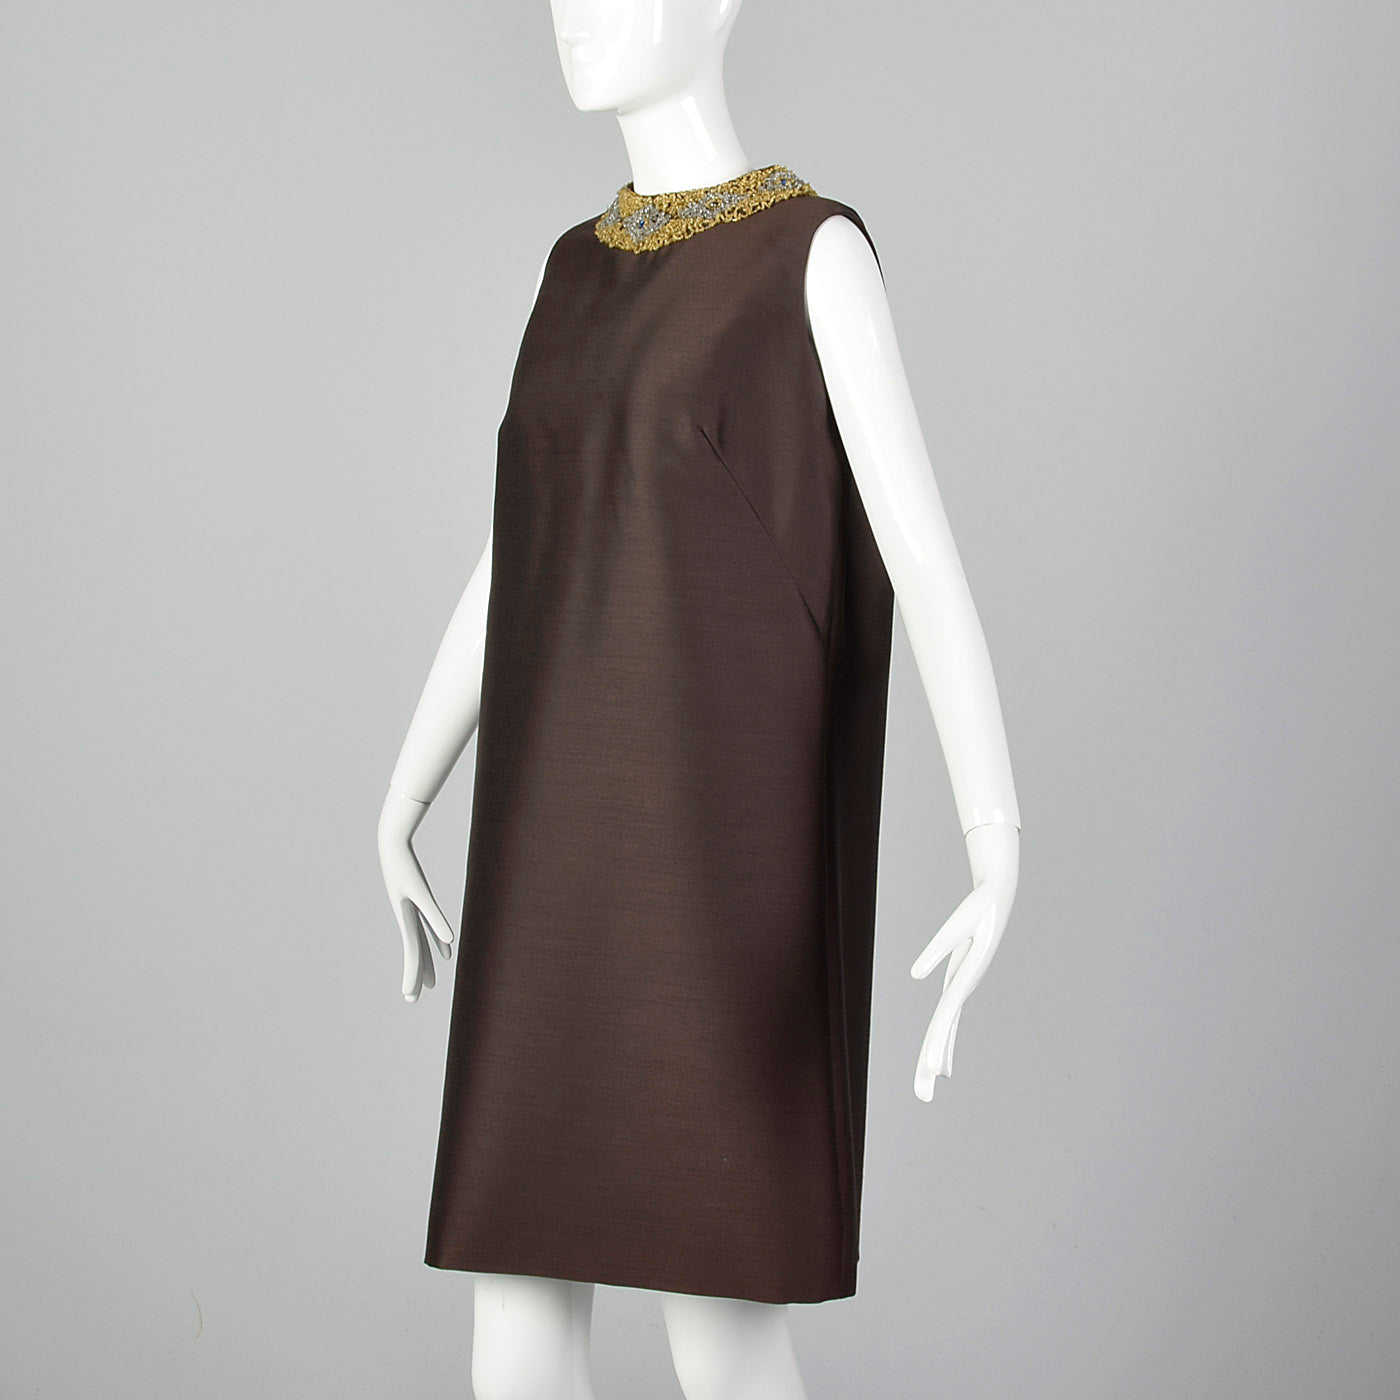 1960s Brown Shift Dress with Beaded Collar